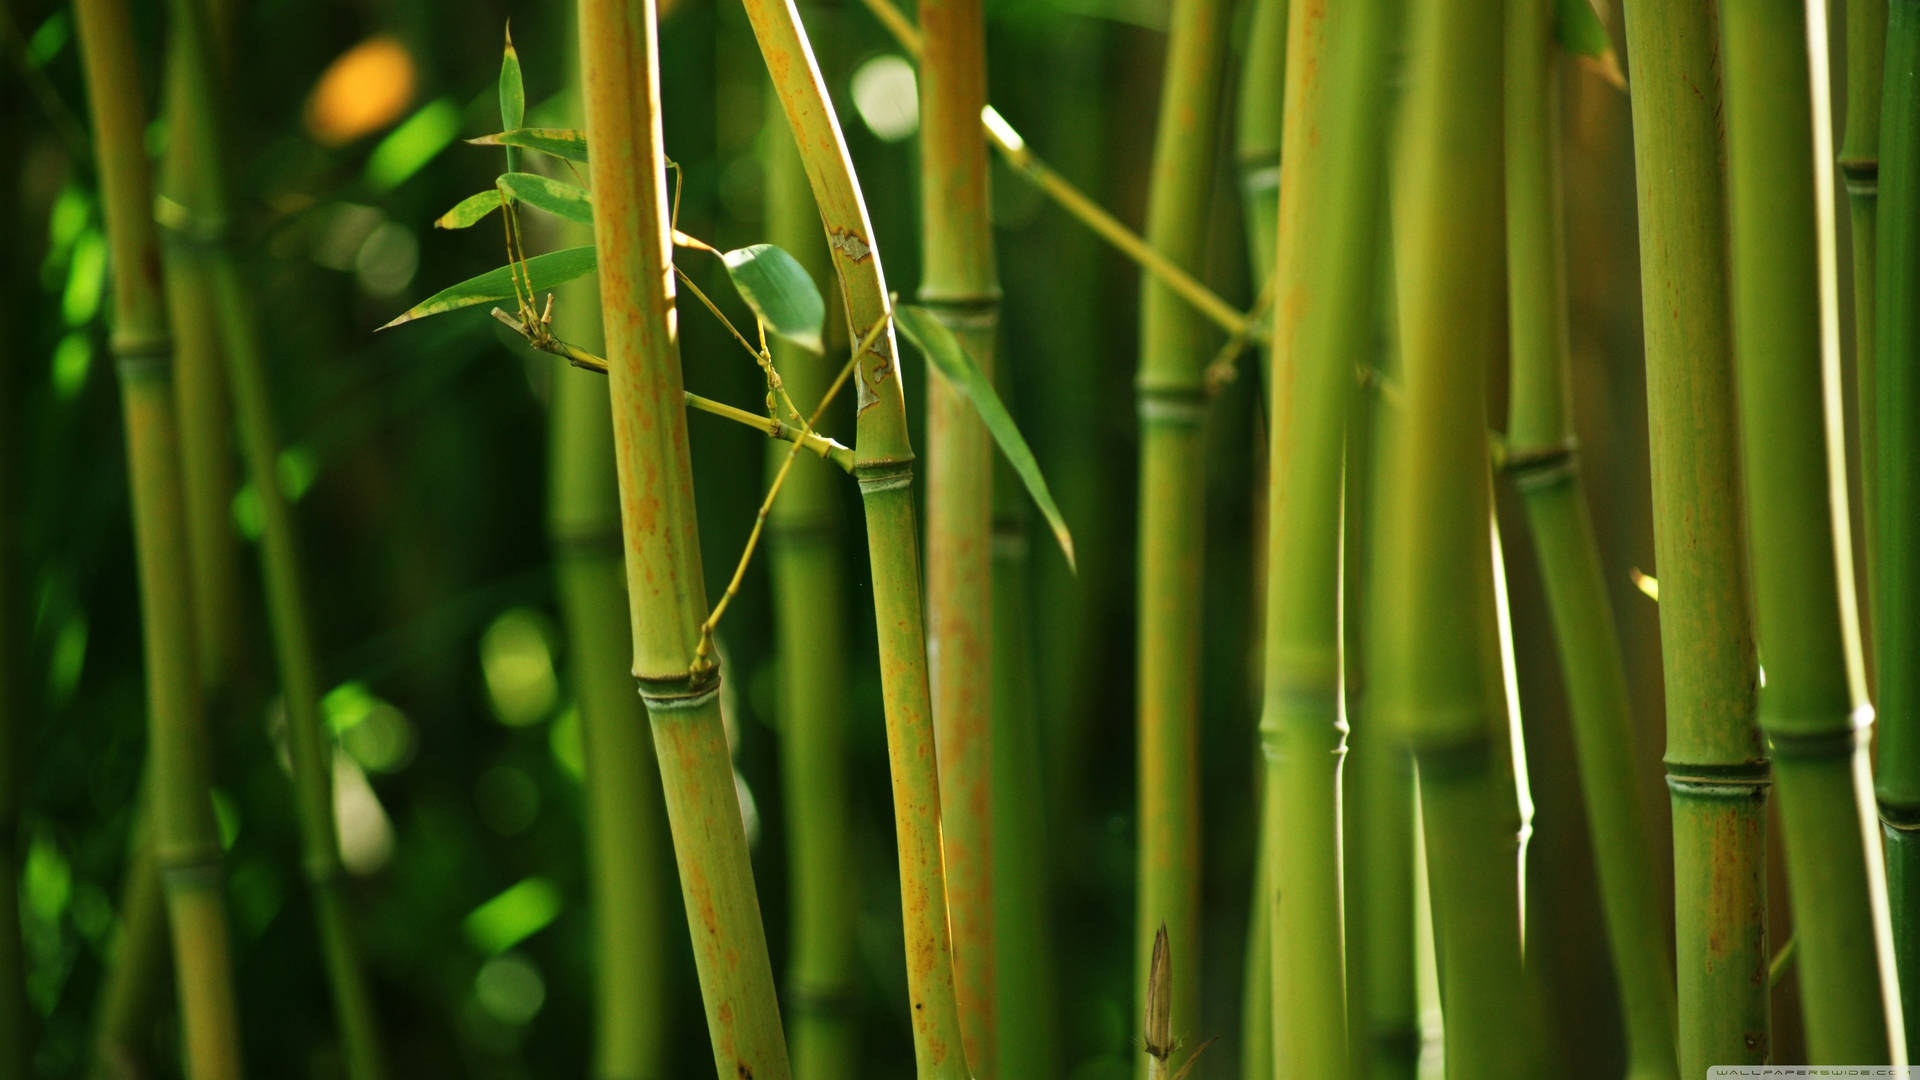 Bamboo 4k Tree With Small Leaves Wallpaper